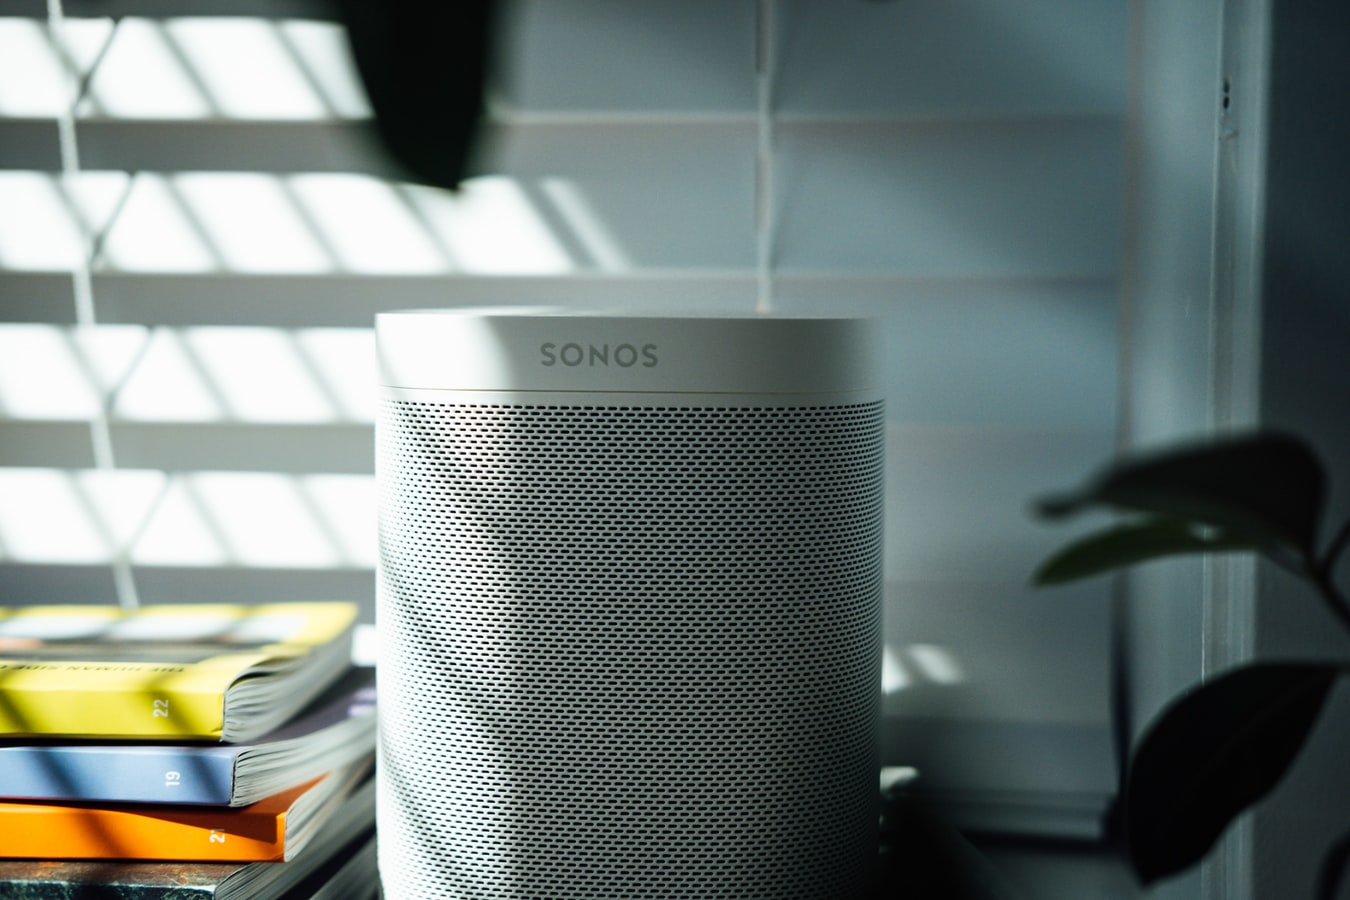 Sonos are suing Google over their speaker patents